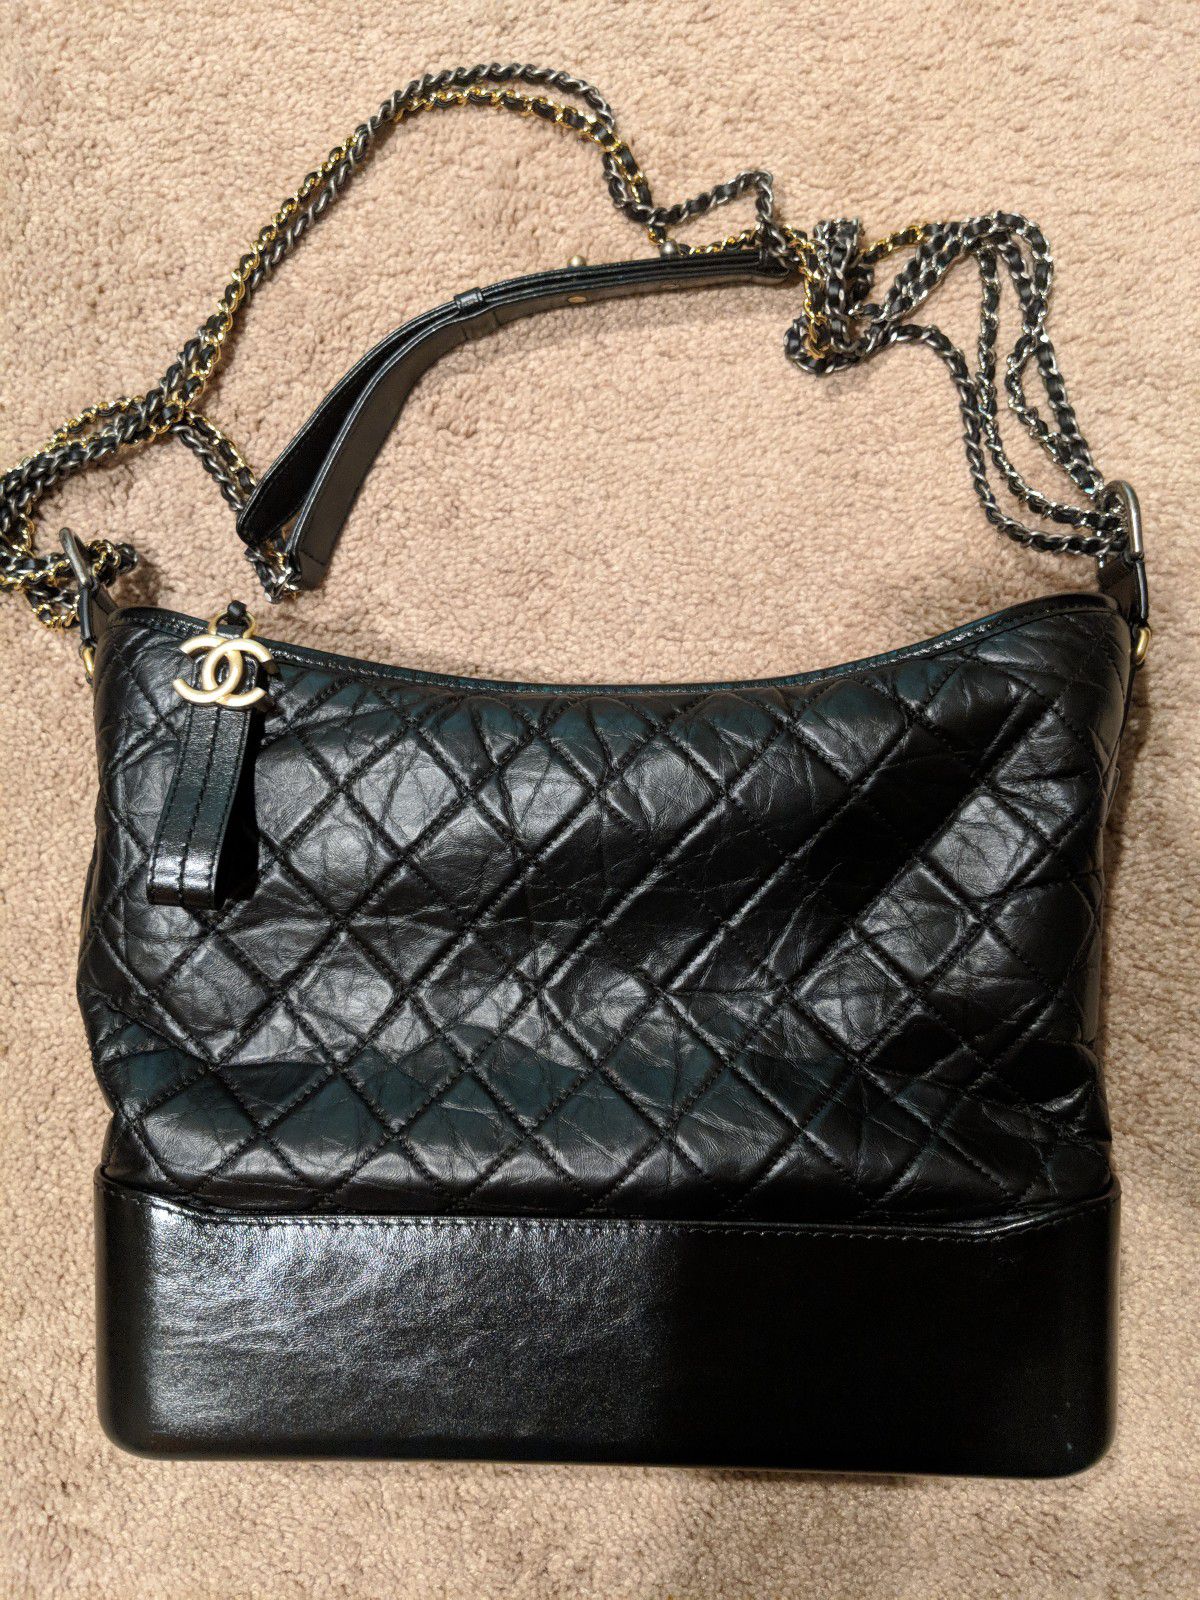 Authentic CHANEL GABRIELLE Large Hobo Bag Black for Sale in